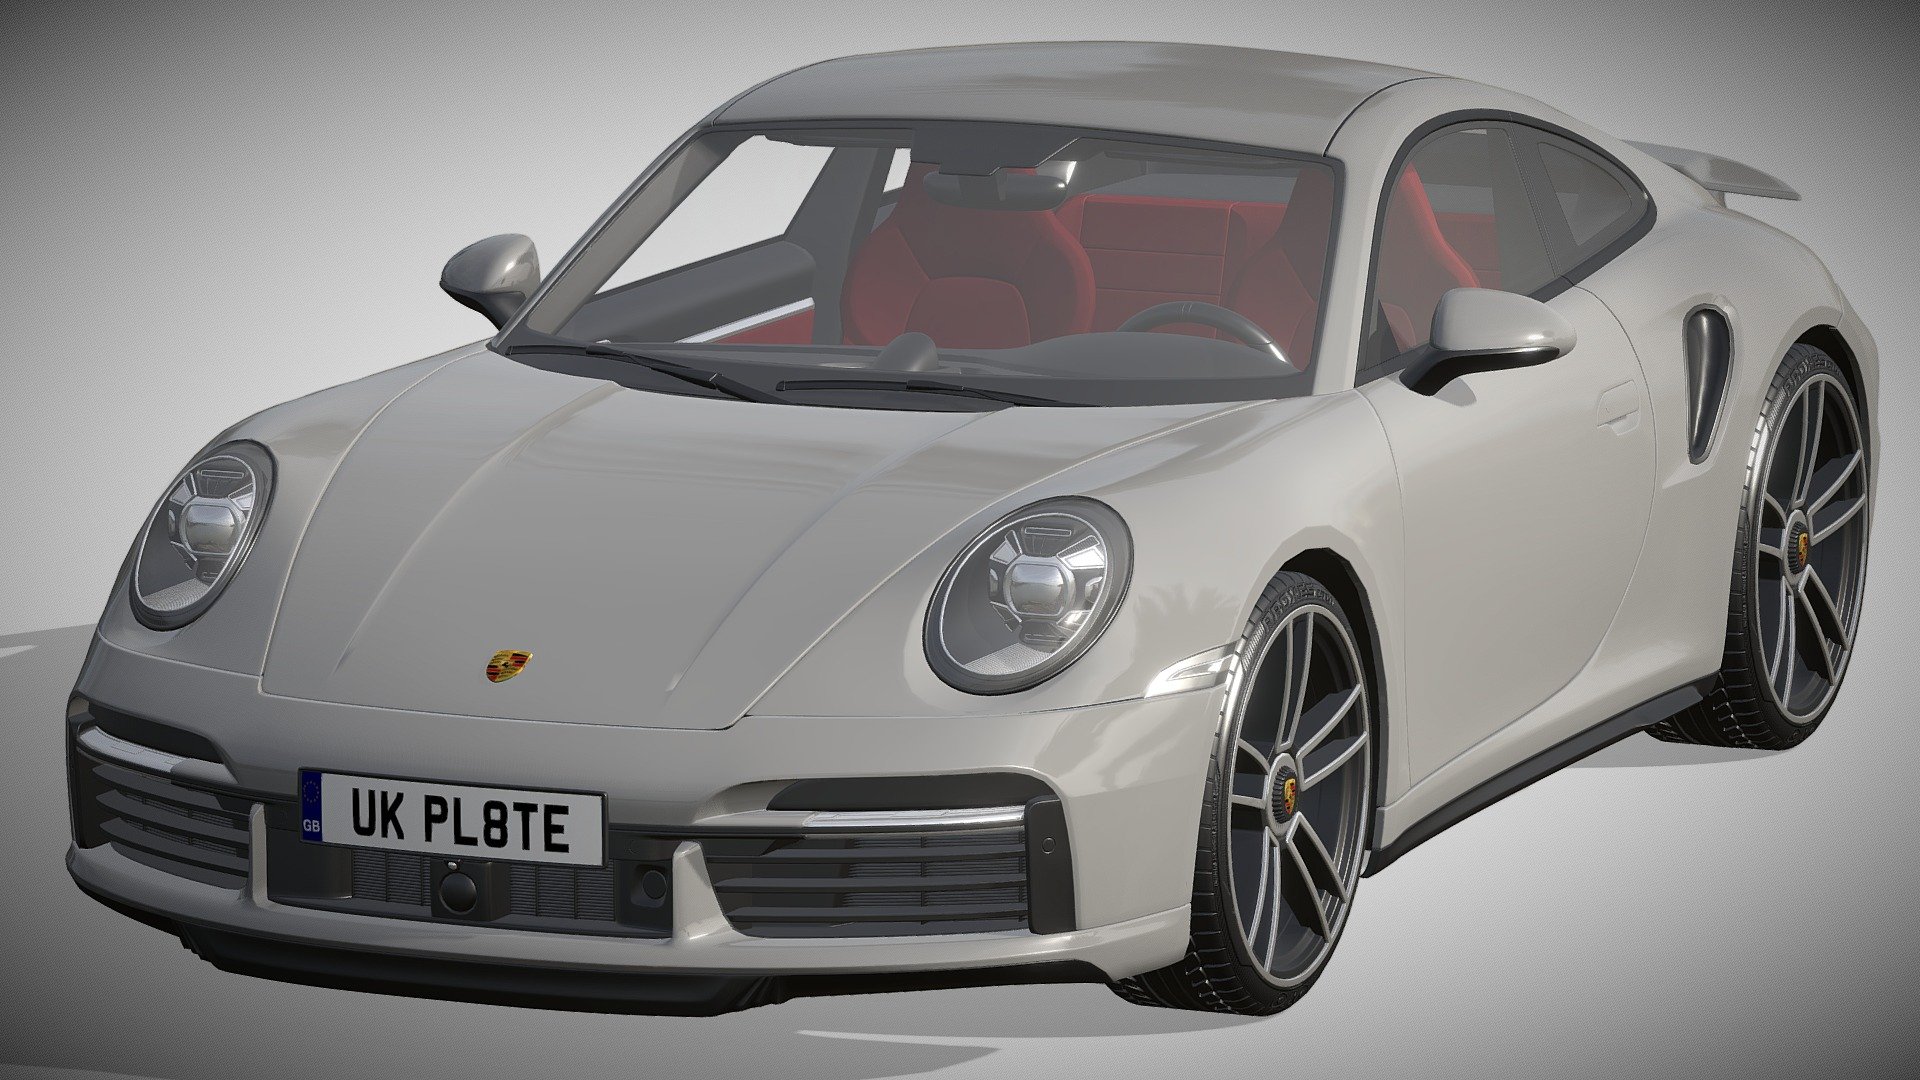 Porsche 911 Turbo S

https://www.porsche.com/usa/models/911/911-turbo-models/911-turbo-s/

Clean geometry Light weight model, yet completely detailed for HI-Res renders. Use for movies, Advertisements or games

Corona render and materials

All textures include in *.rar files

Lighting setup is not included in the file! - Porsche 911 Turbo S 2021 - Buy Royalty Free 3D model by zifir3d 3d model